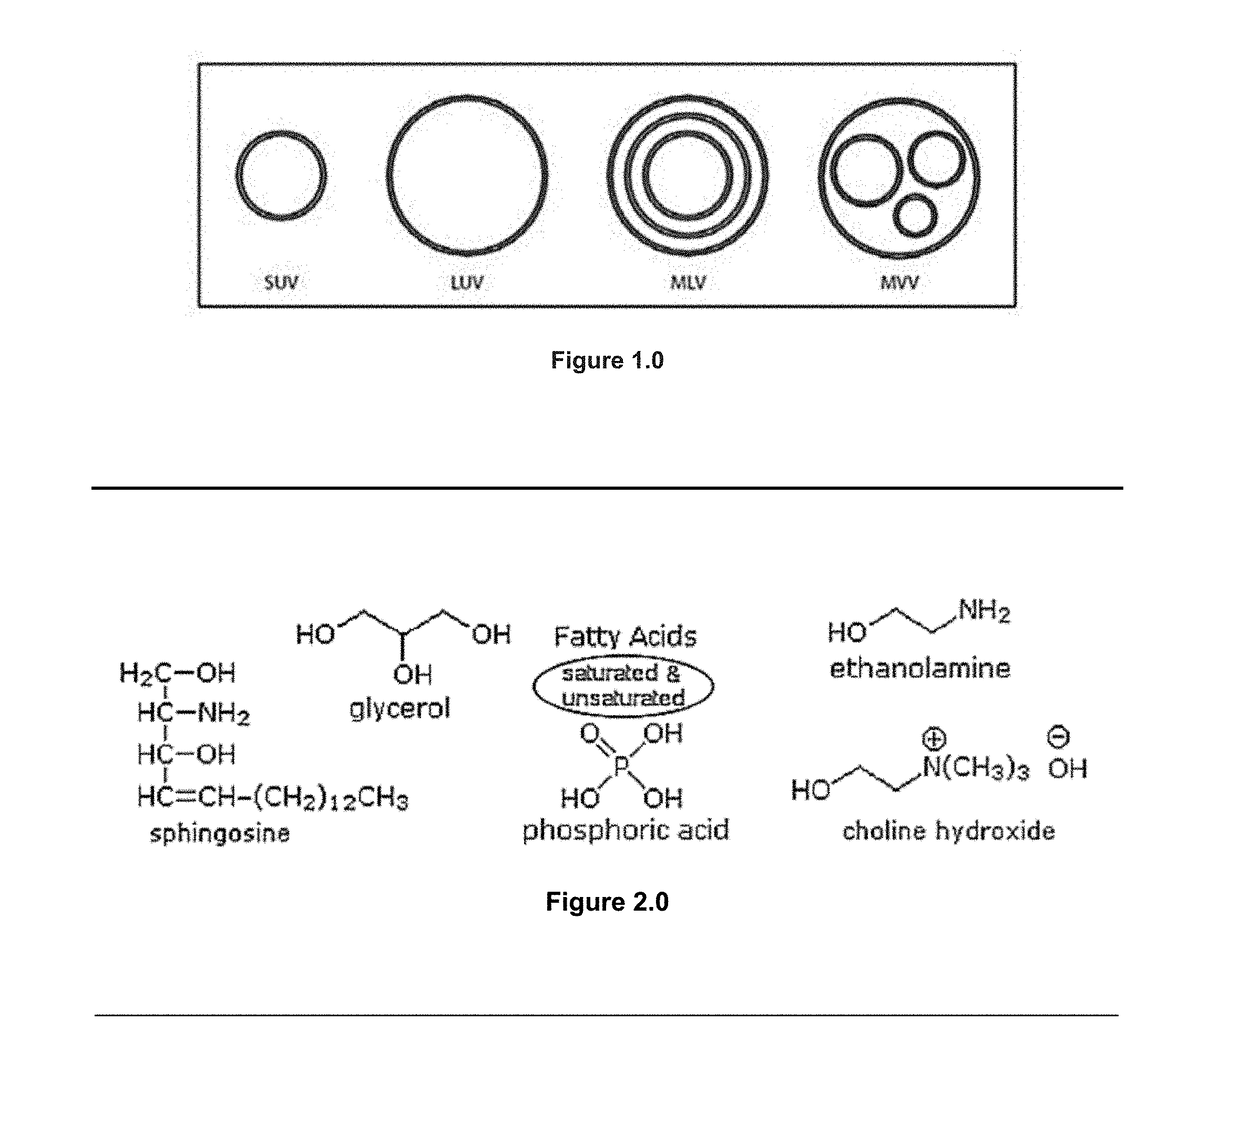 Apparatus and method for preparing cosmeceutical ingredients containing epi-dermal delivery mechanisms